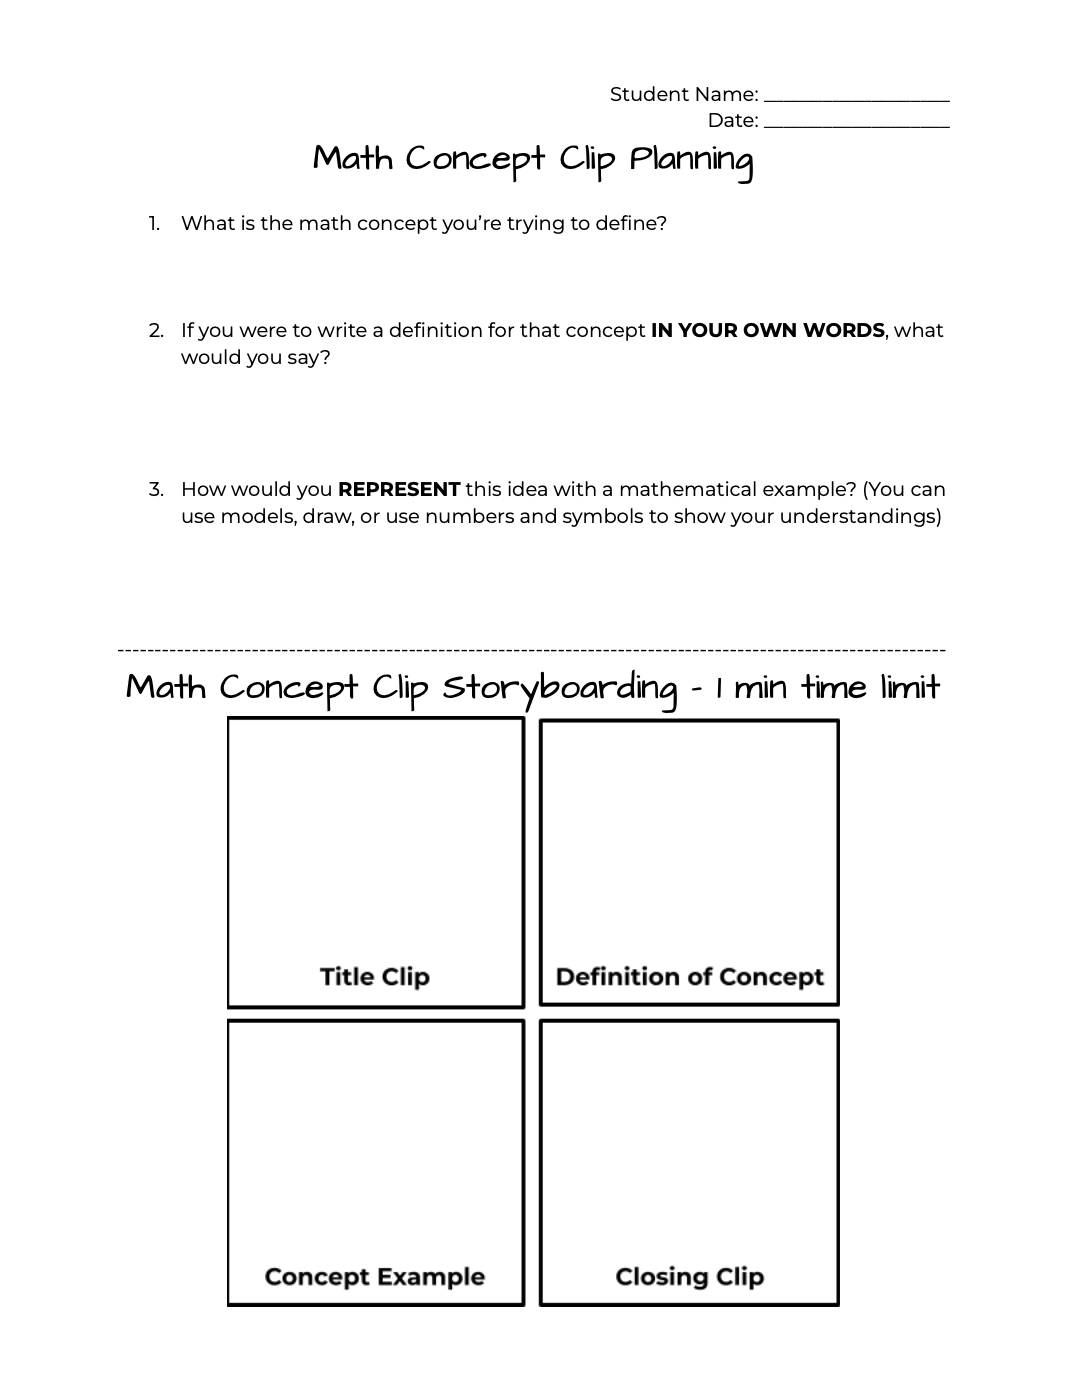 A blackline master for the Concept Clips project. Provides prompts for students to storyboard their mathematical explanations